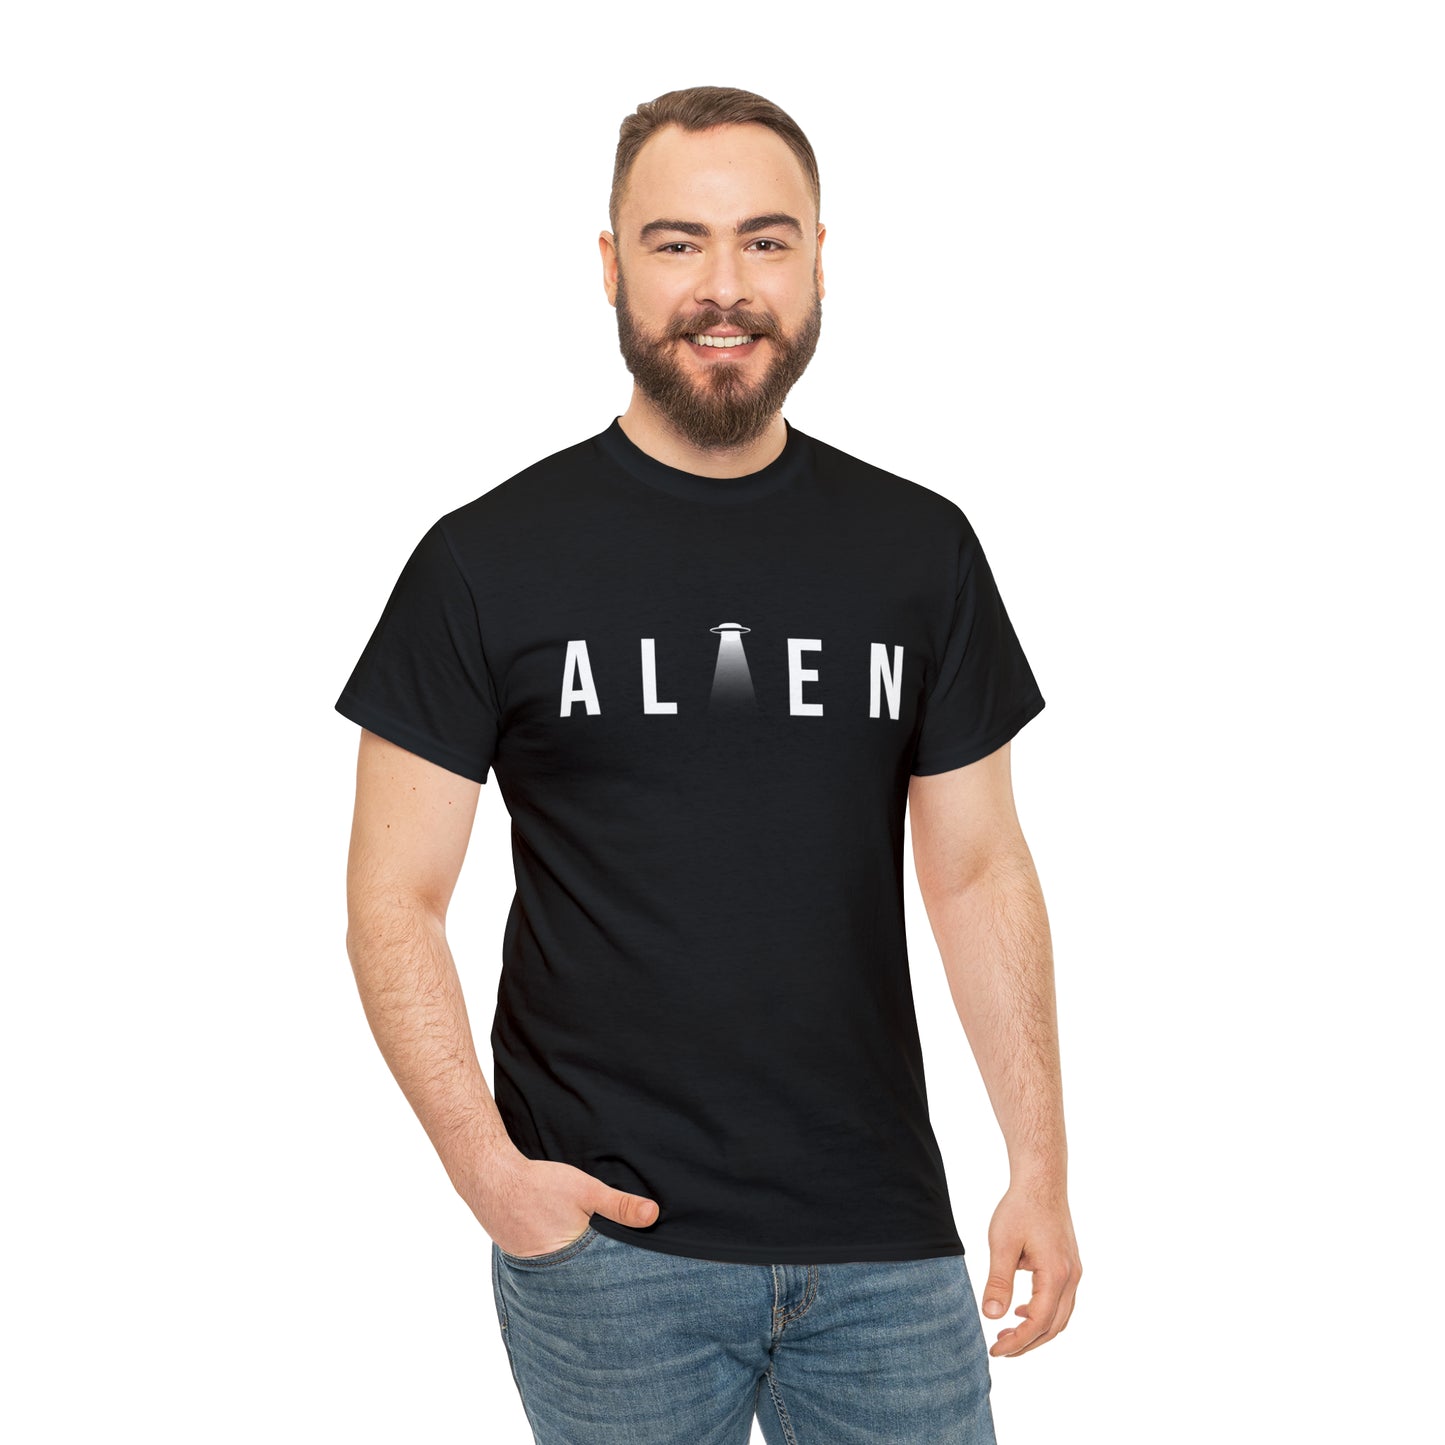 Alien T-Shirt For Alien Abduction TShirt For Spaceship T Shirt For Conspiracy Shirt For Extraterrestrial T-Shirt UFO Shirt For, Alien Gift Idea